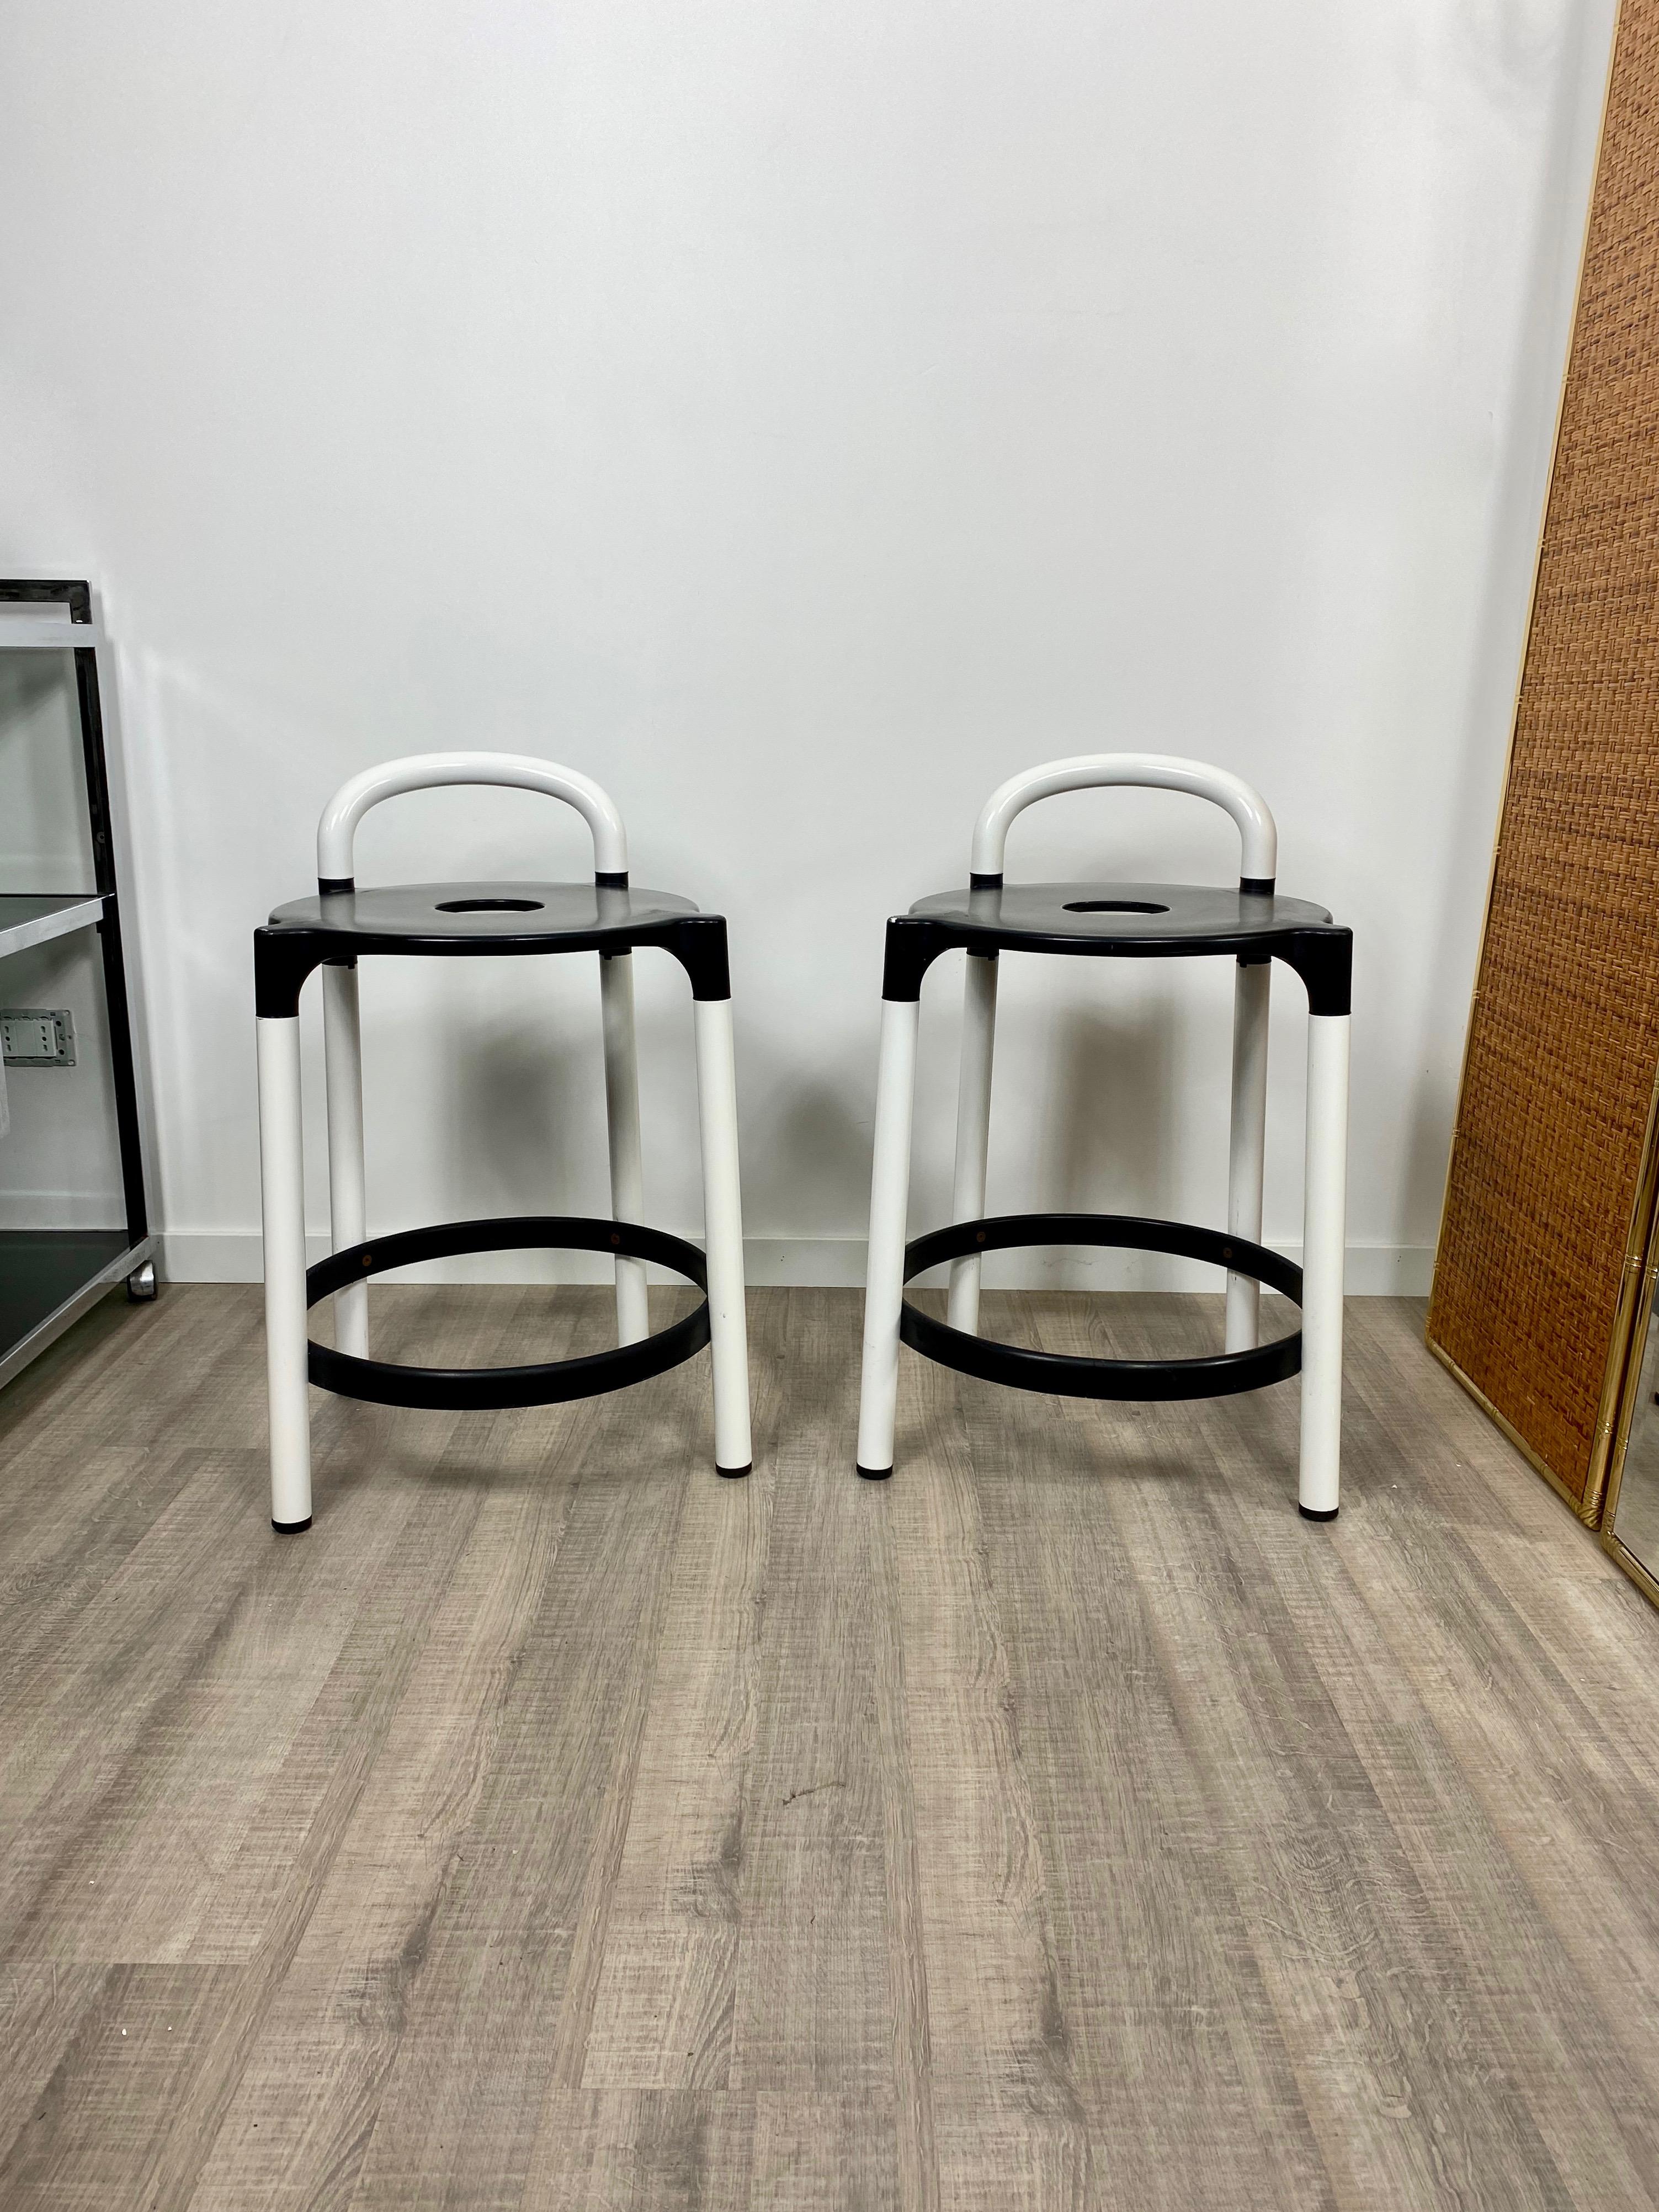 Pair of Postmodern Stools by Anna Casatelli Ferrieri for Kartell, Italy, 1980s In Good Condition For Sale In Rome, IT